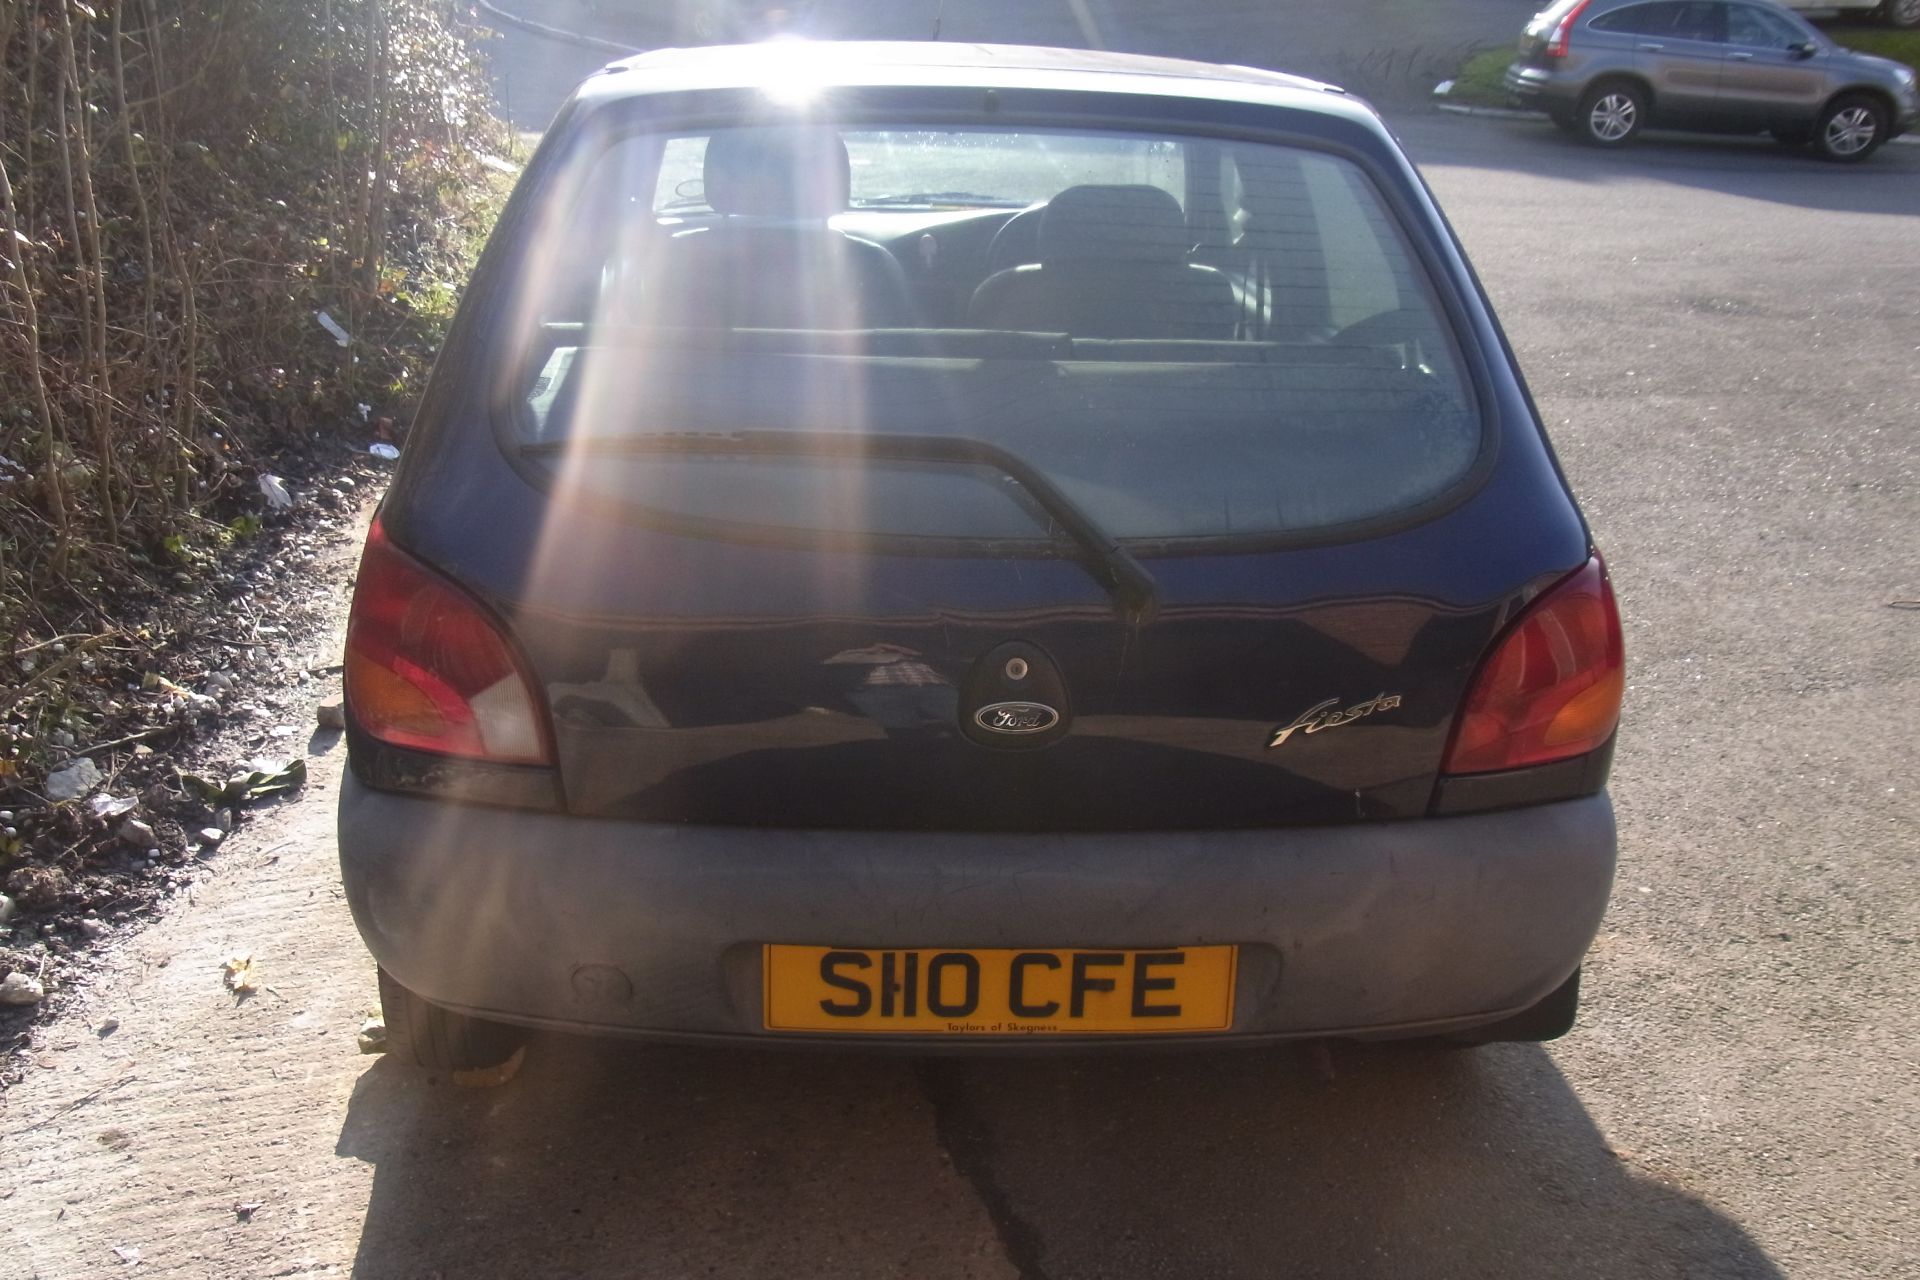 S110 CFE Ford Fiesta Finesse - No V5 - No Key - No Key
LICENCED ATF BIDDERS ONLY - Image 3 of 3